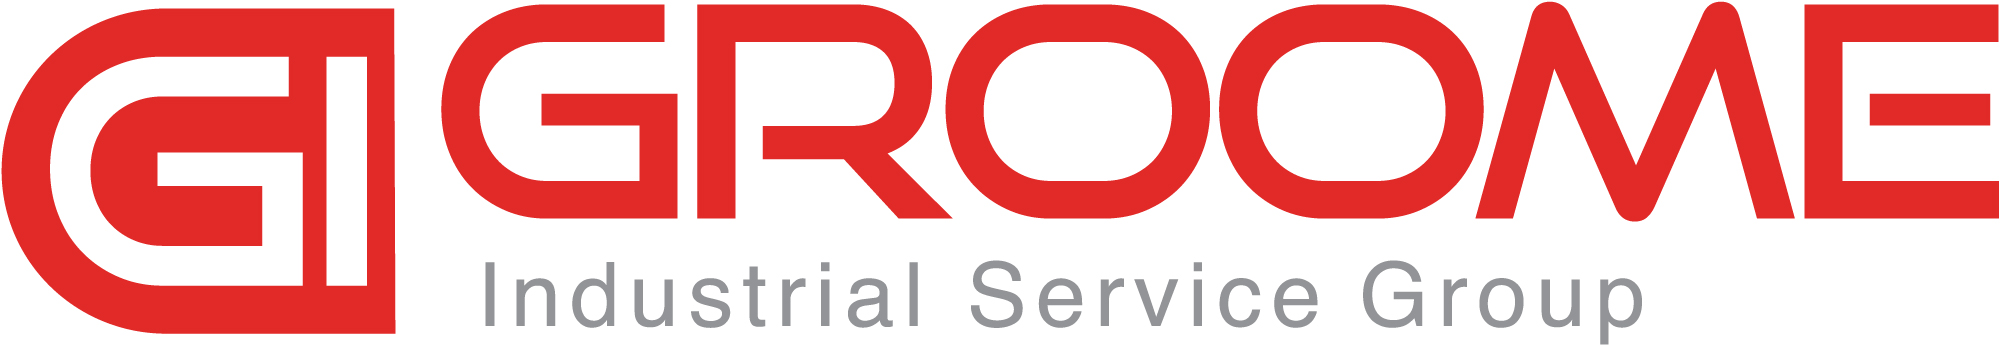 Groome Industrial Service Group